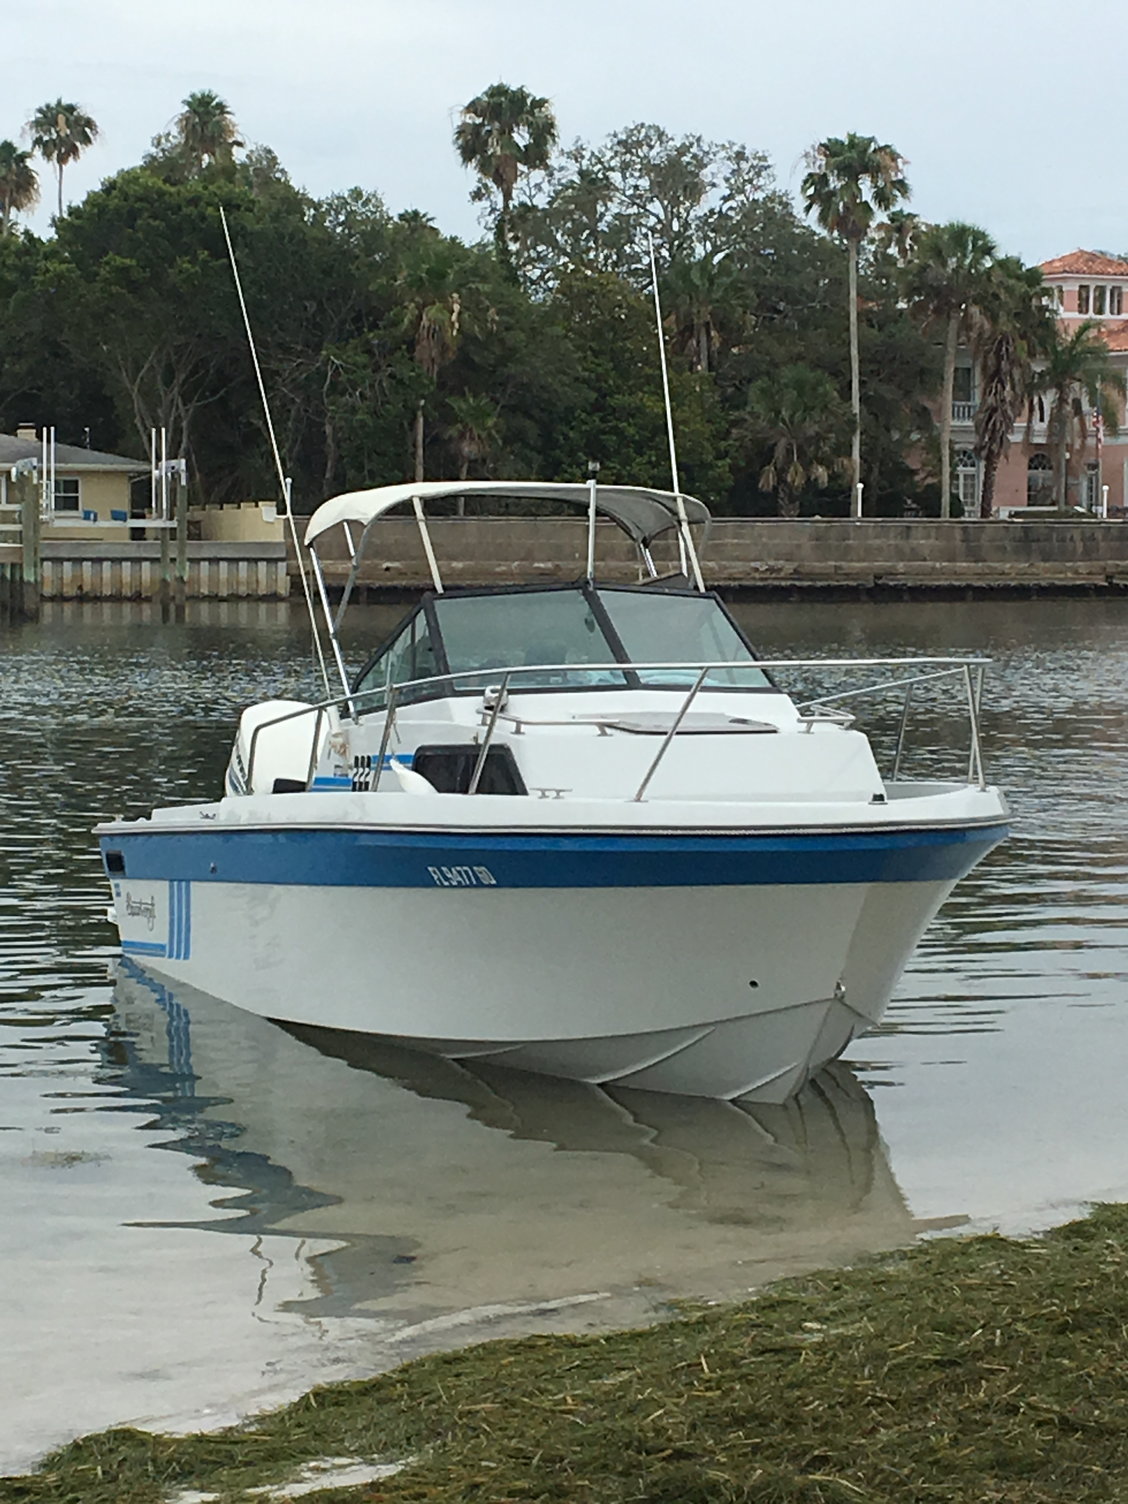 Where to find a Bimini for my boat - The Hull Truth - Boating and